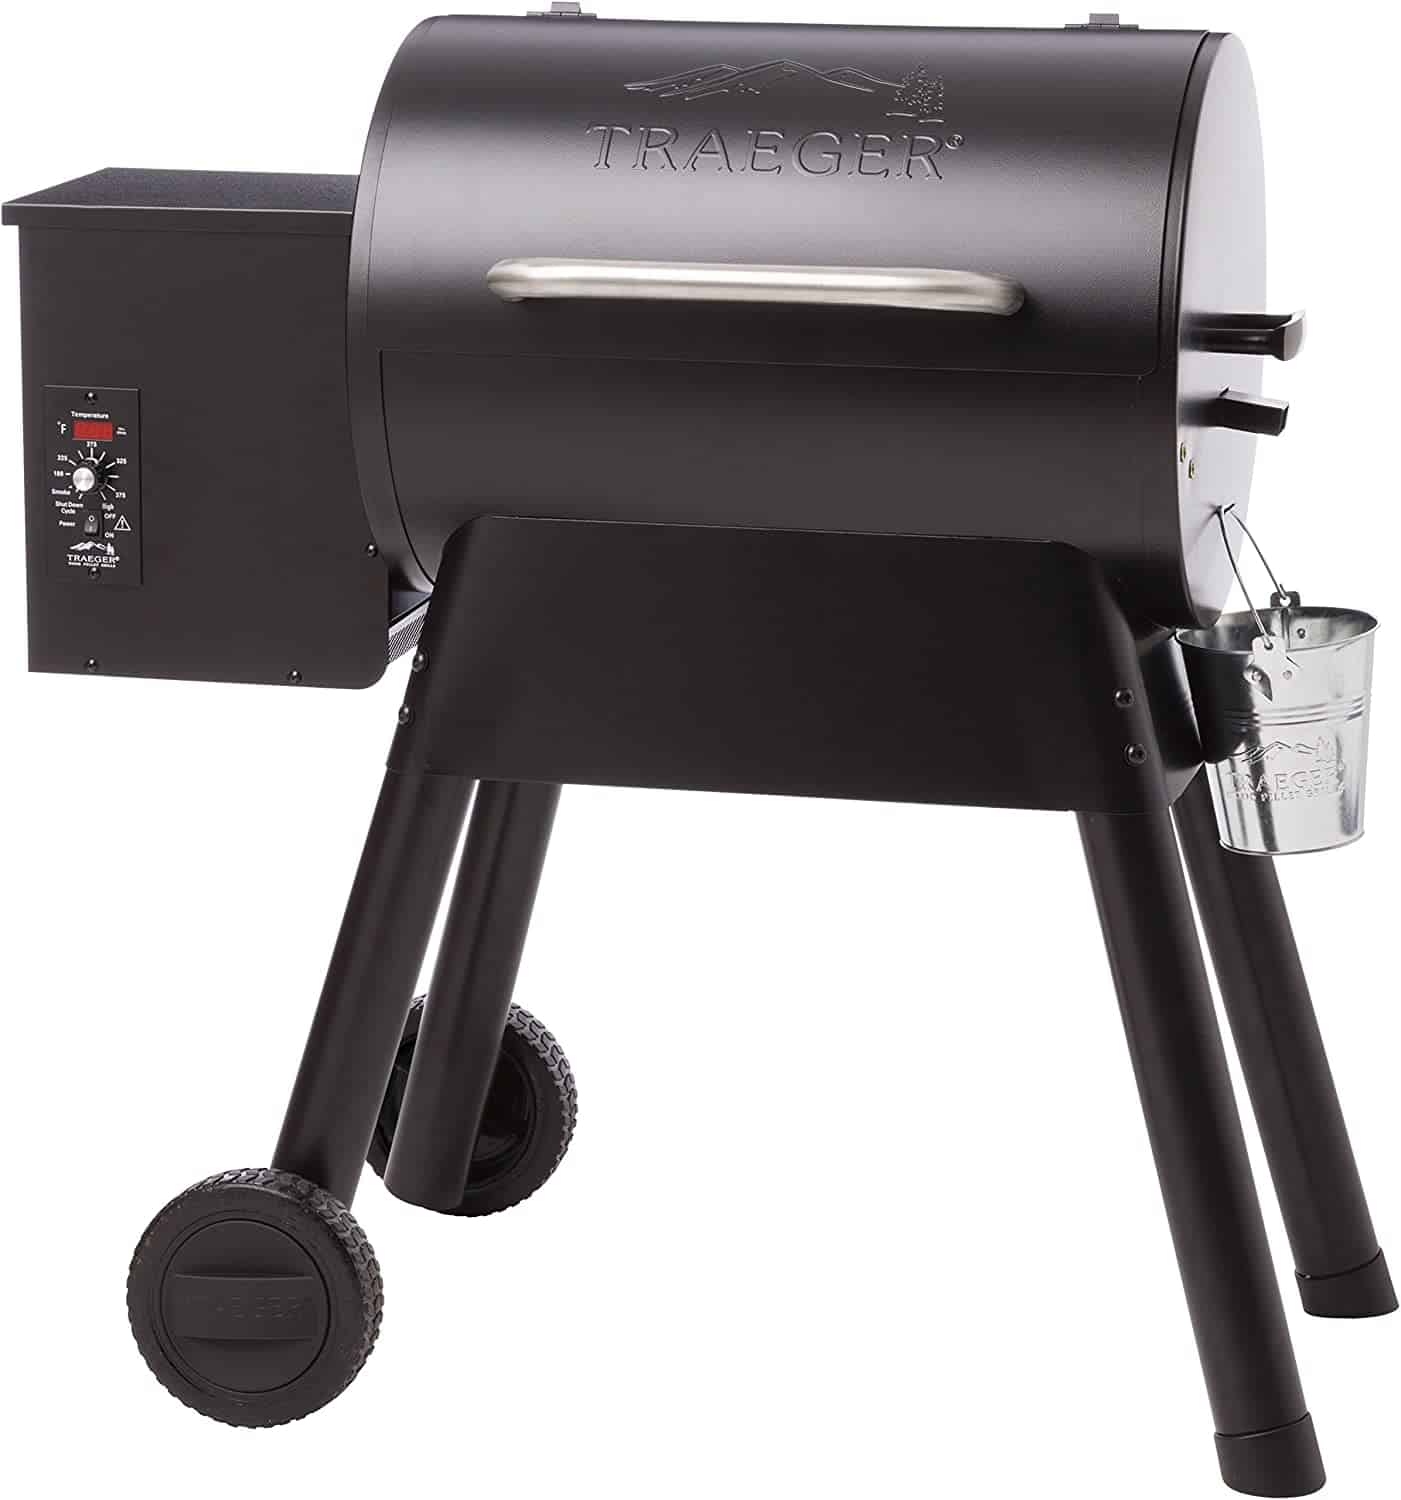 Best stability for uneven surfaces: Traeger Grills Bronson 20 Wood Pellet Grill